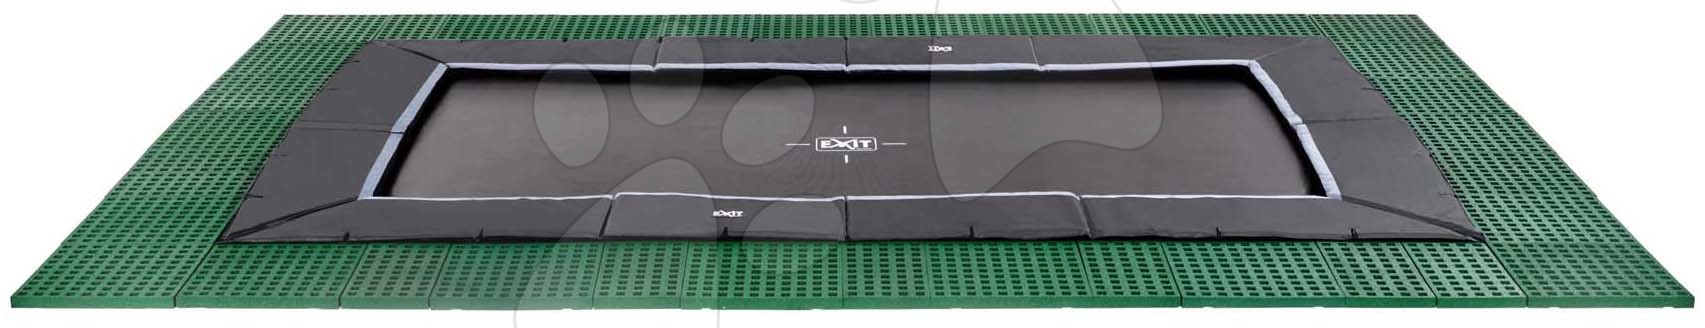 In Ground Trampolines  - EXIT Dynamic trampoline 305x519cm with Freezone safety plates - black 